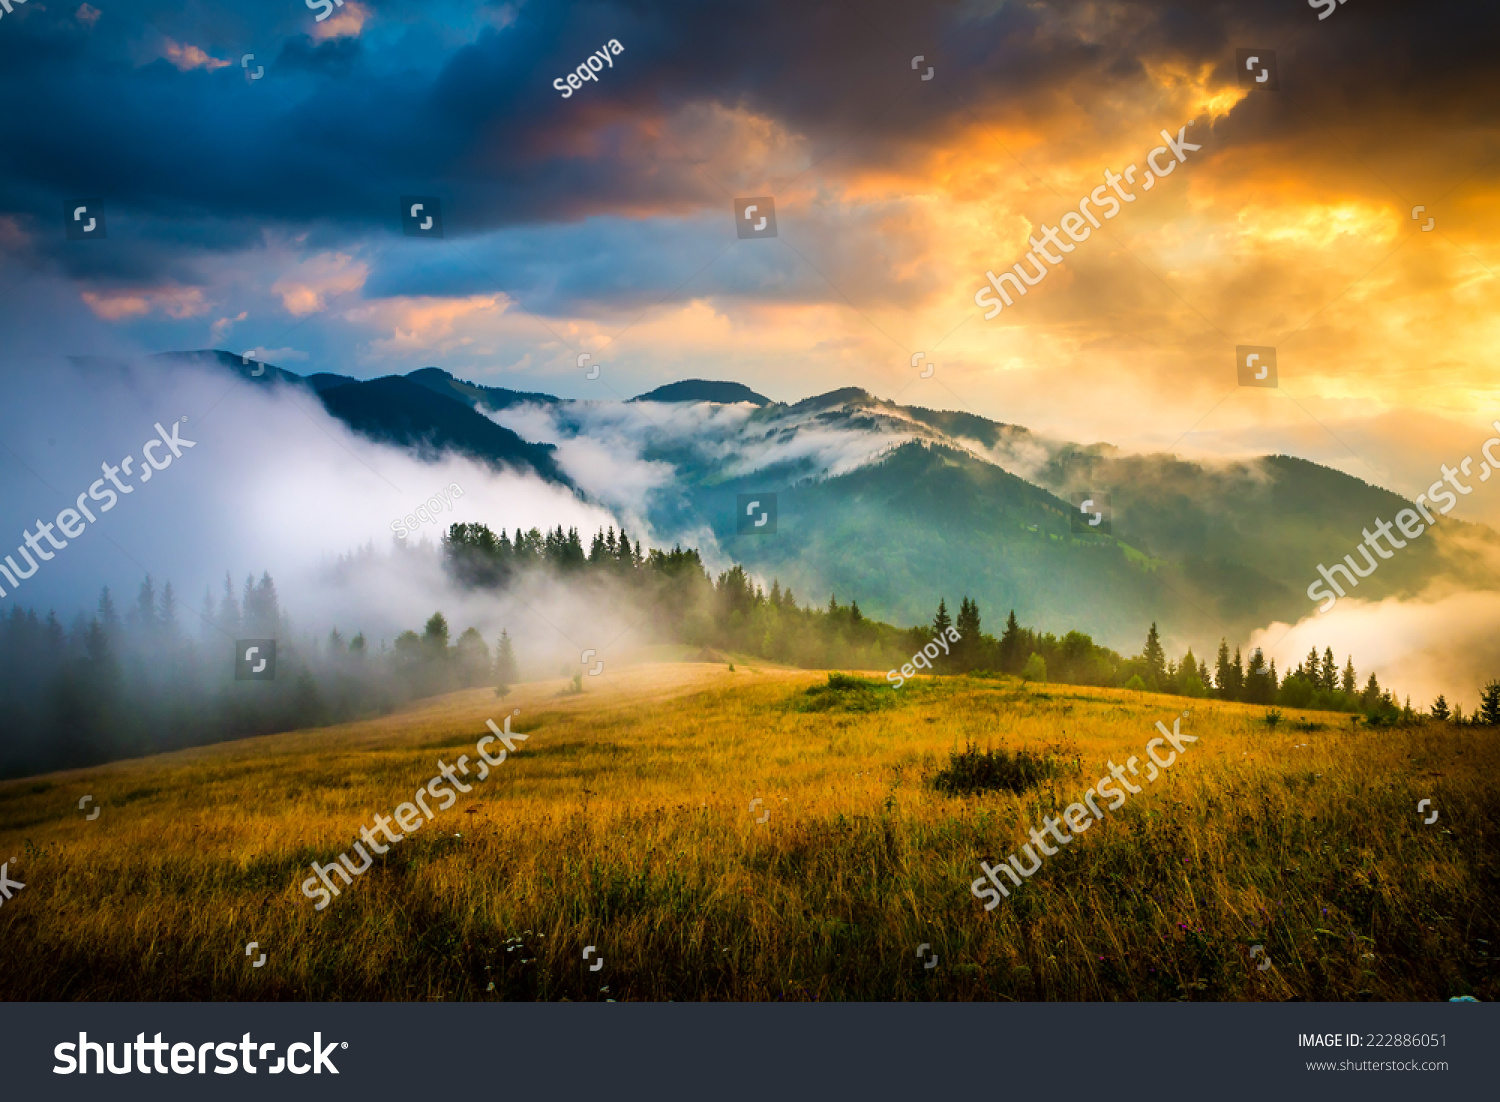 Amazing mountain landscape with fog and a haystack #222886051